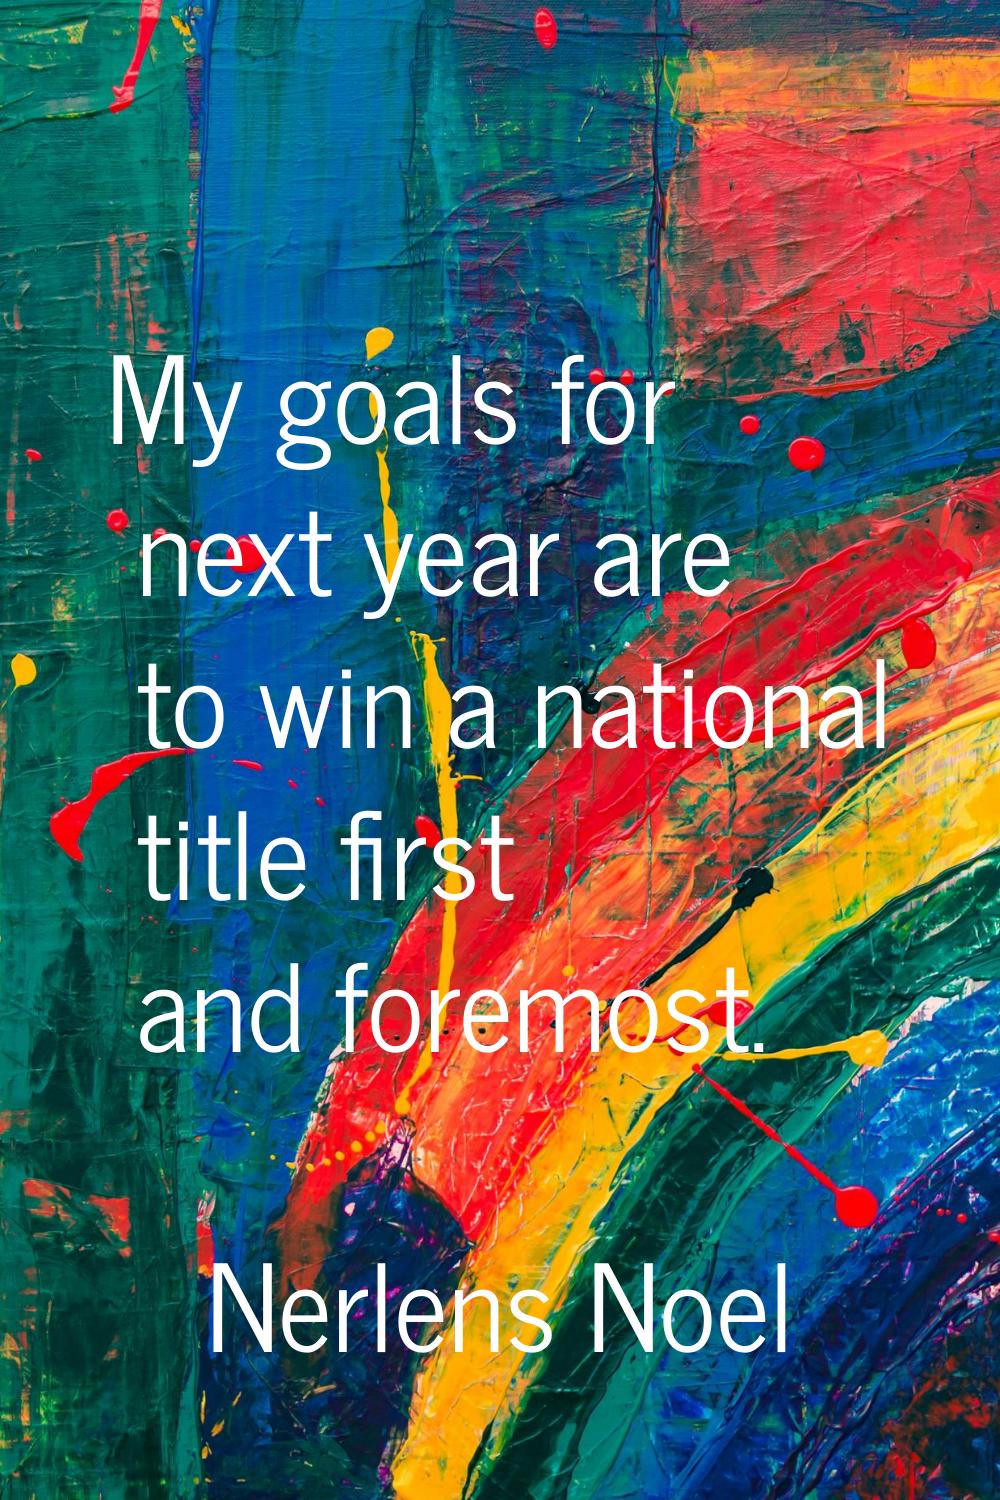 My goals for next year are to win a national title first and foremost.